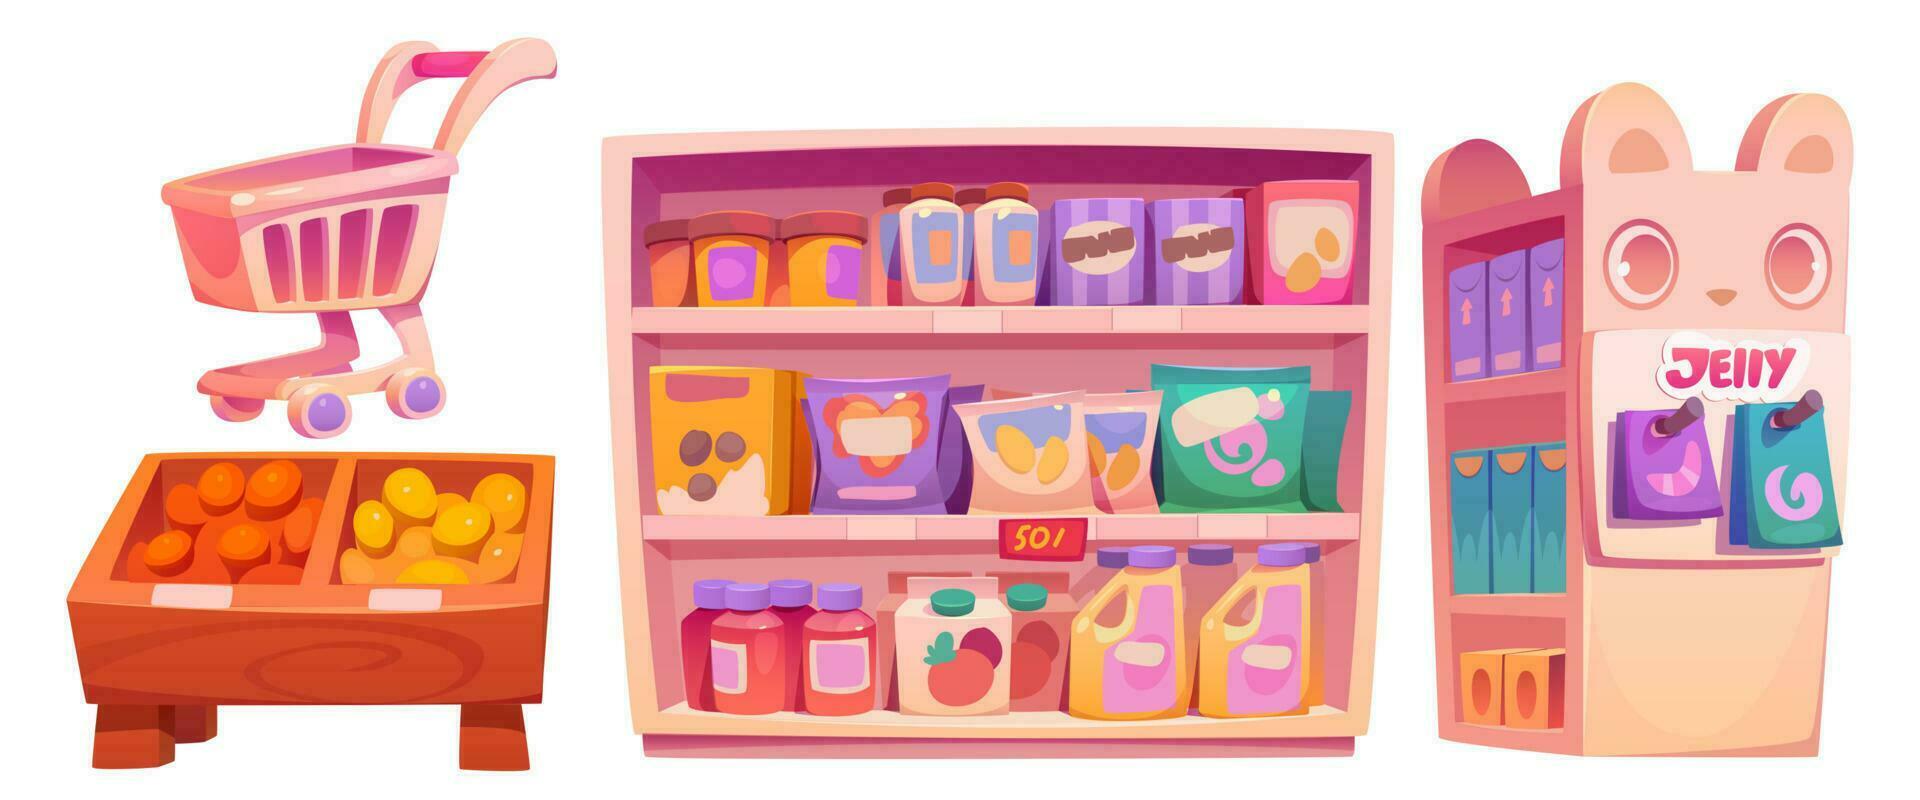 Grocery store with cute shelf in kawaii style vector